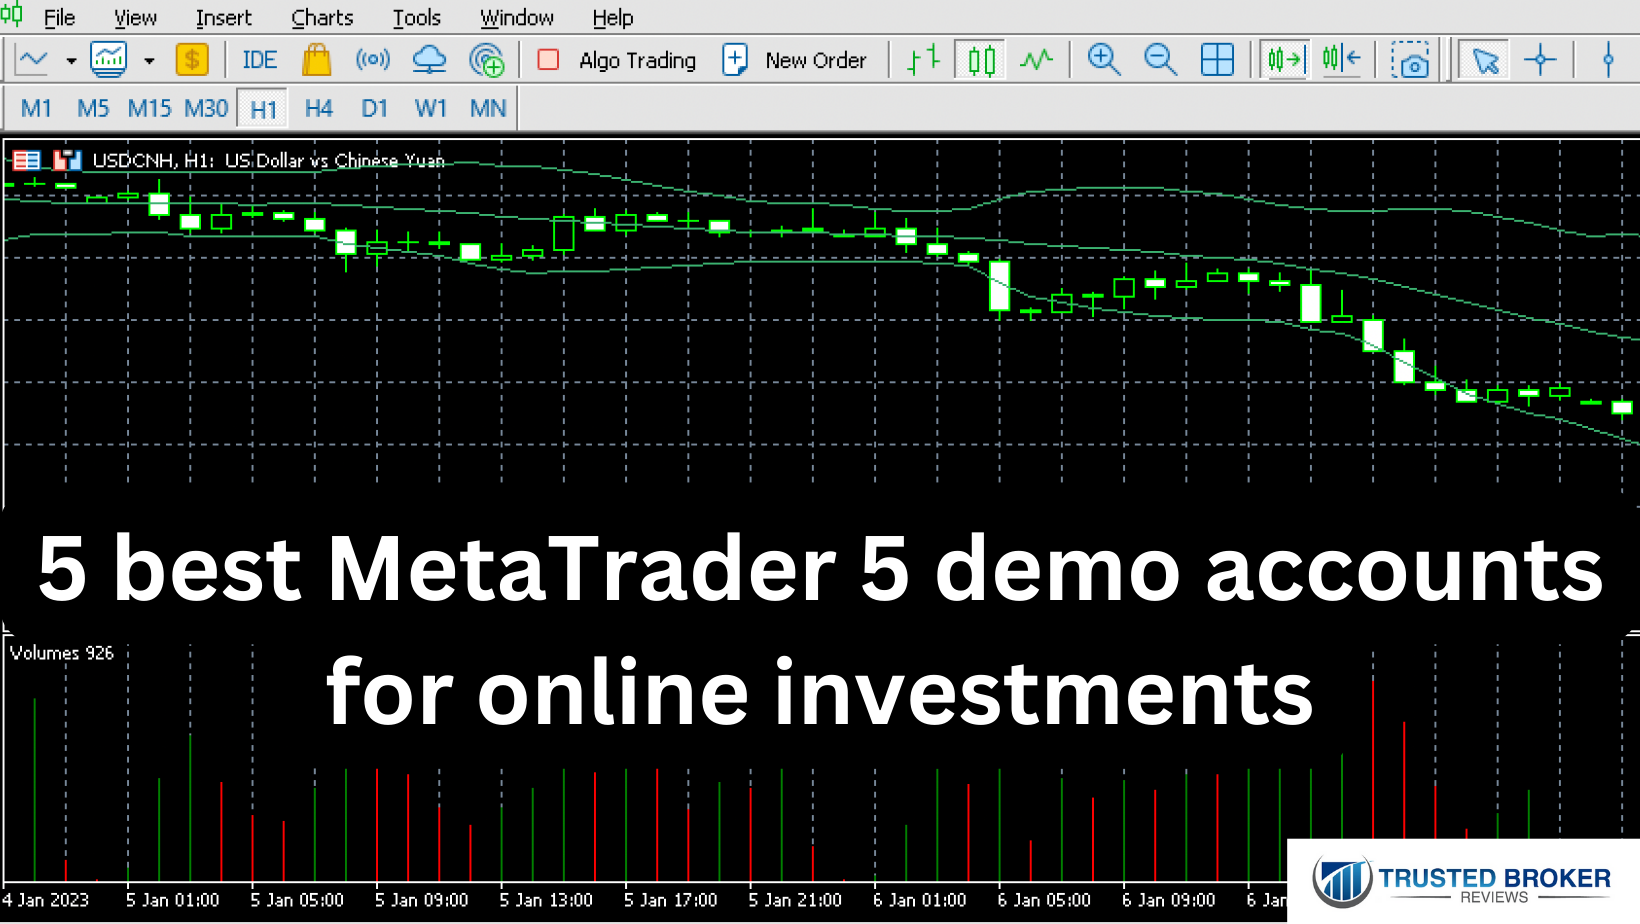 5 best MetaTrader 5 demo accounts for online investments